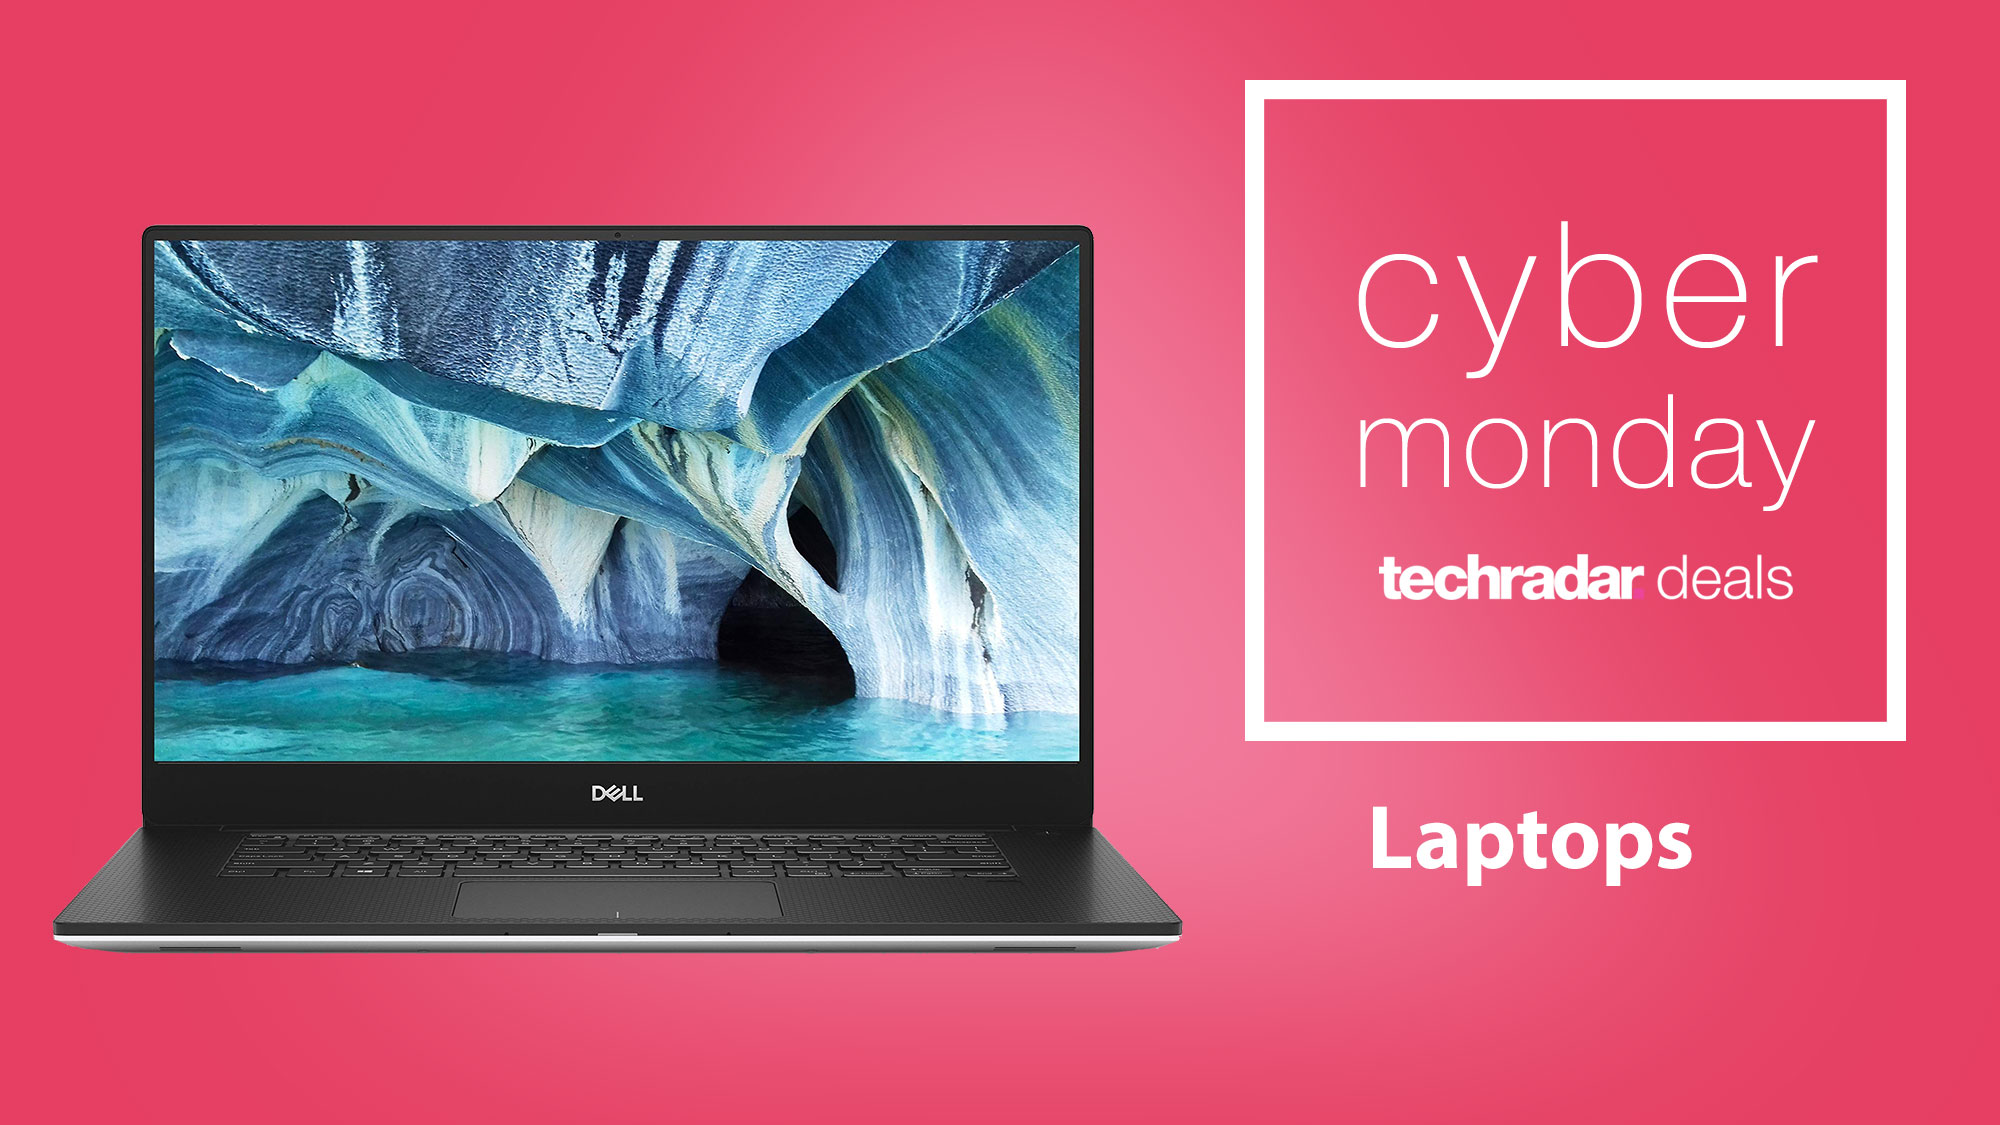 A Dell laptop on a pink background next to TechRadar's Cyber Monday deals logo